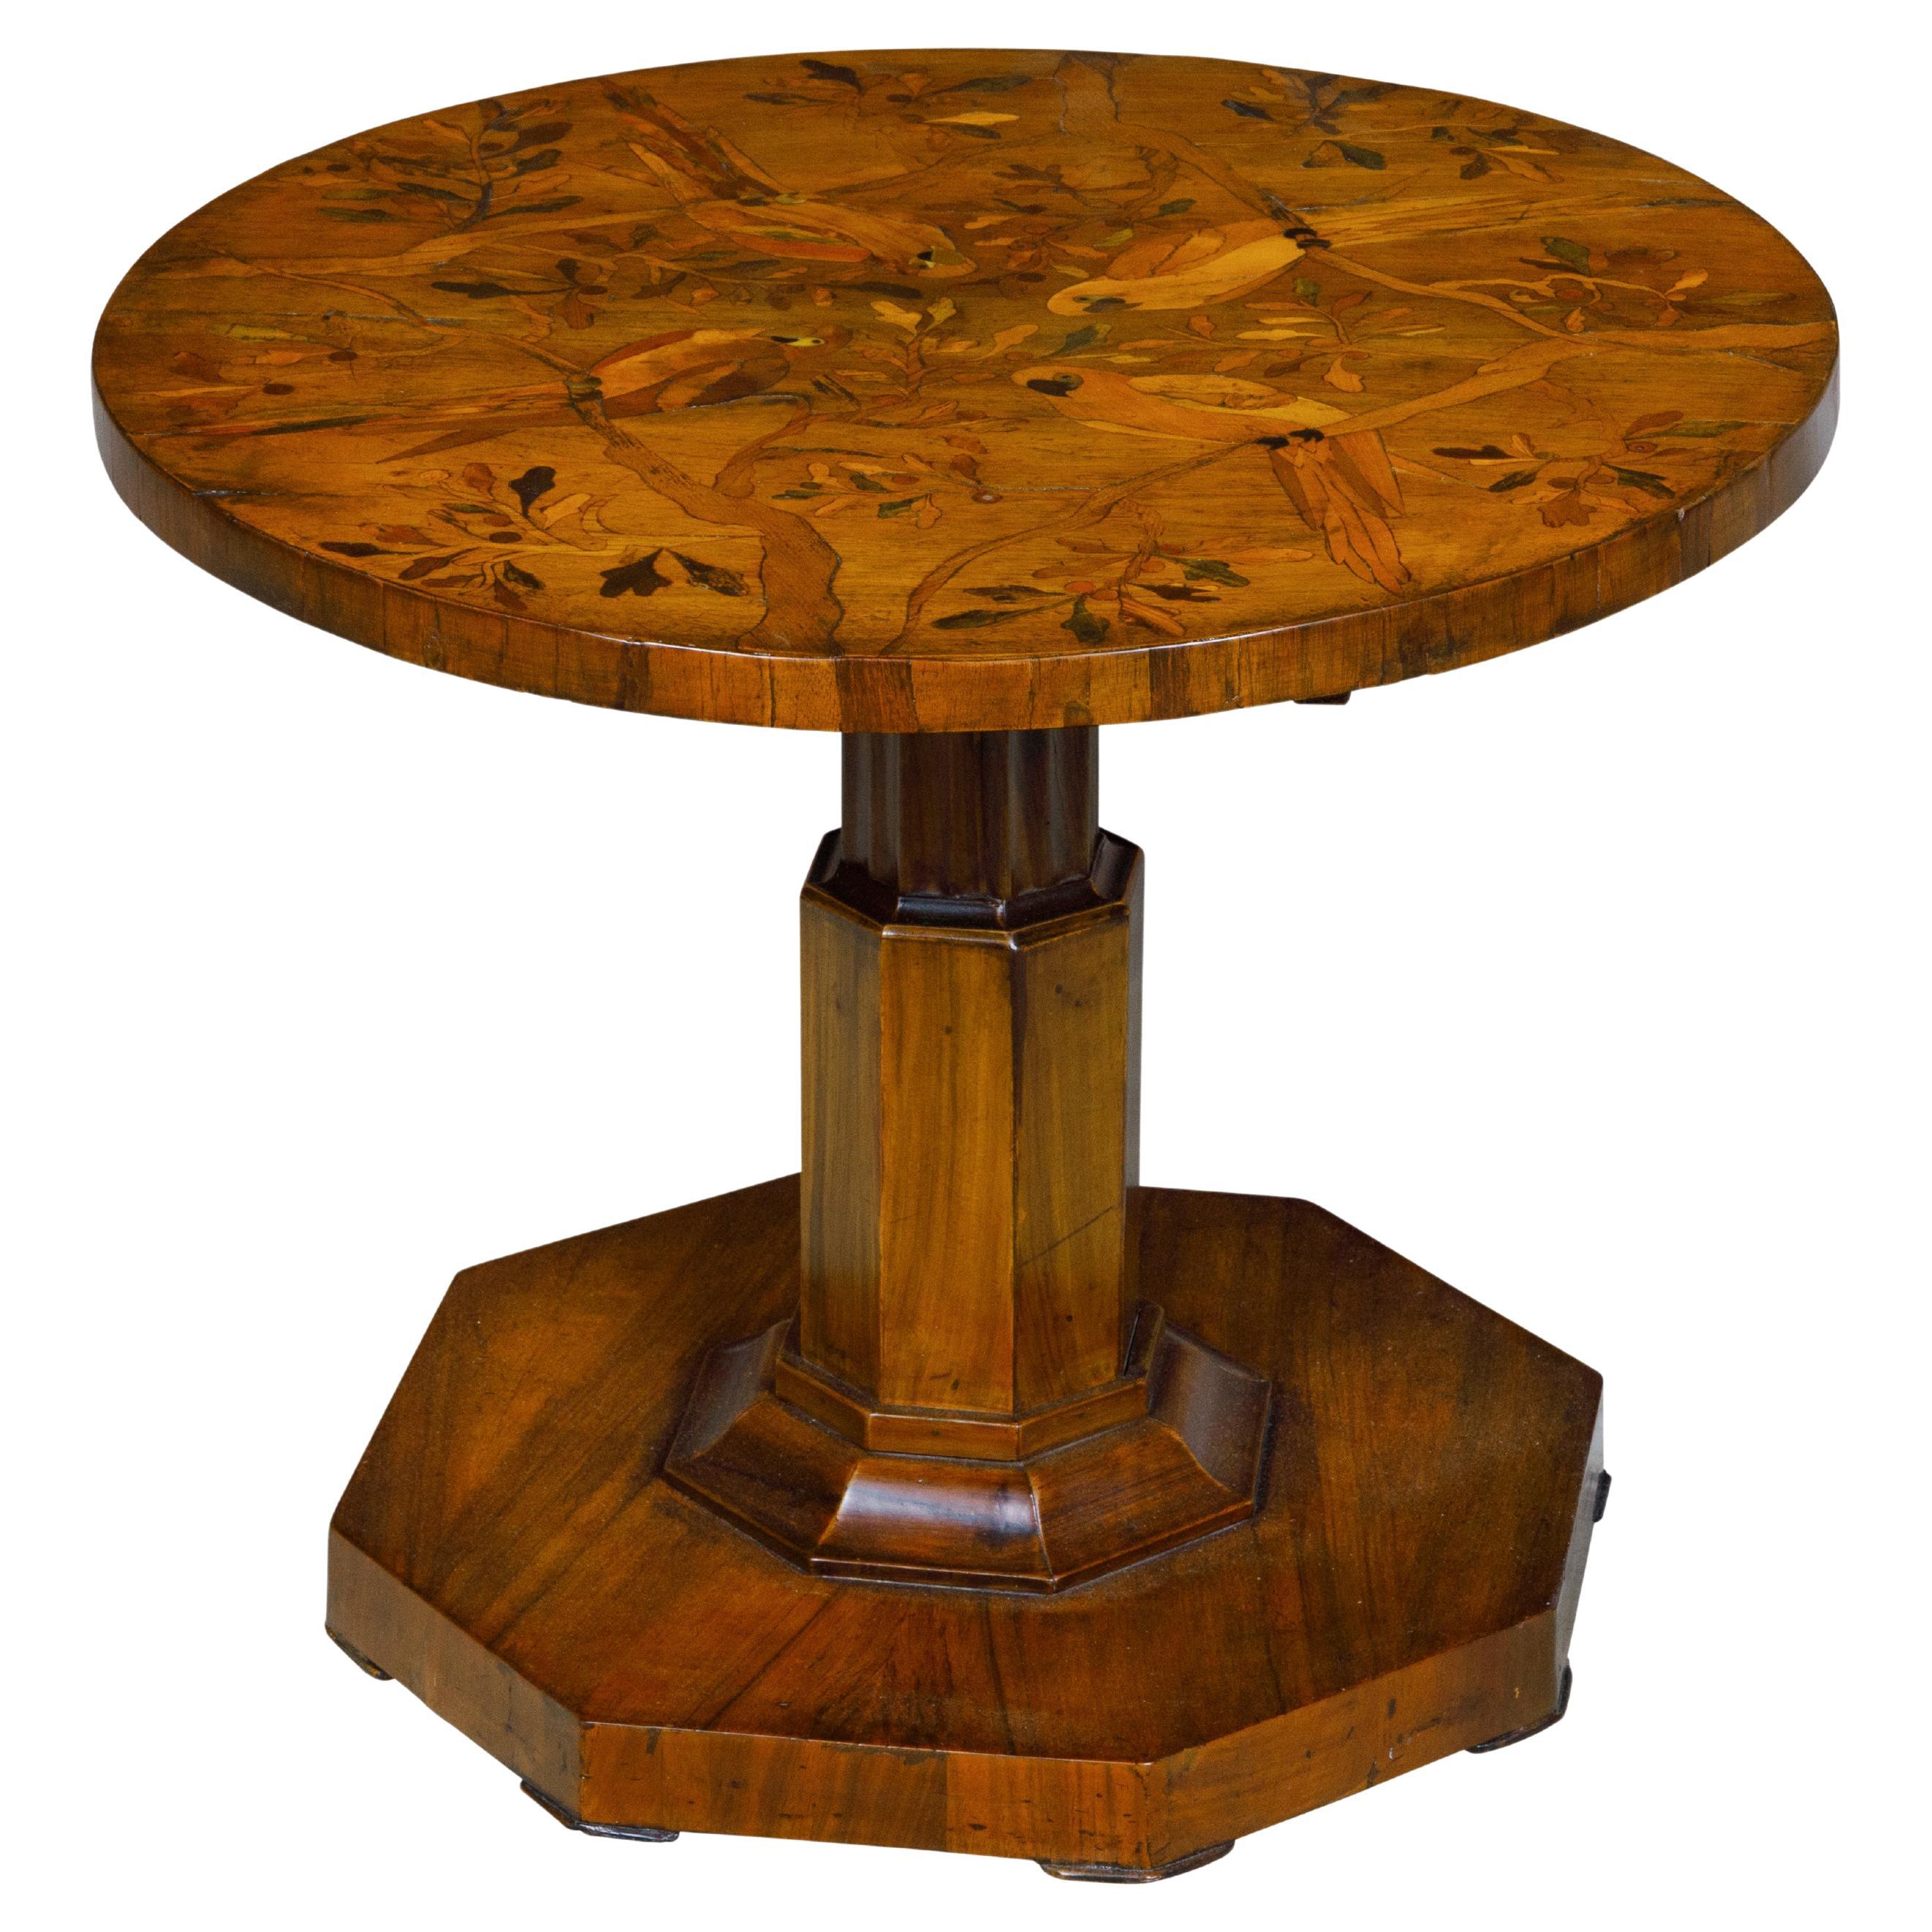 Biedermeier Walnut Side Table with Parrots in Branches Marquetry from Vienna